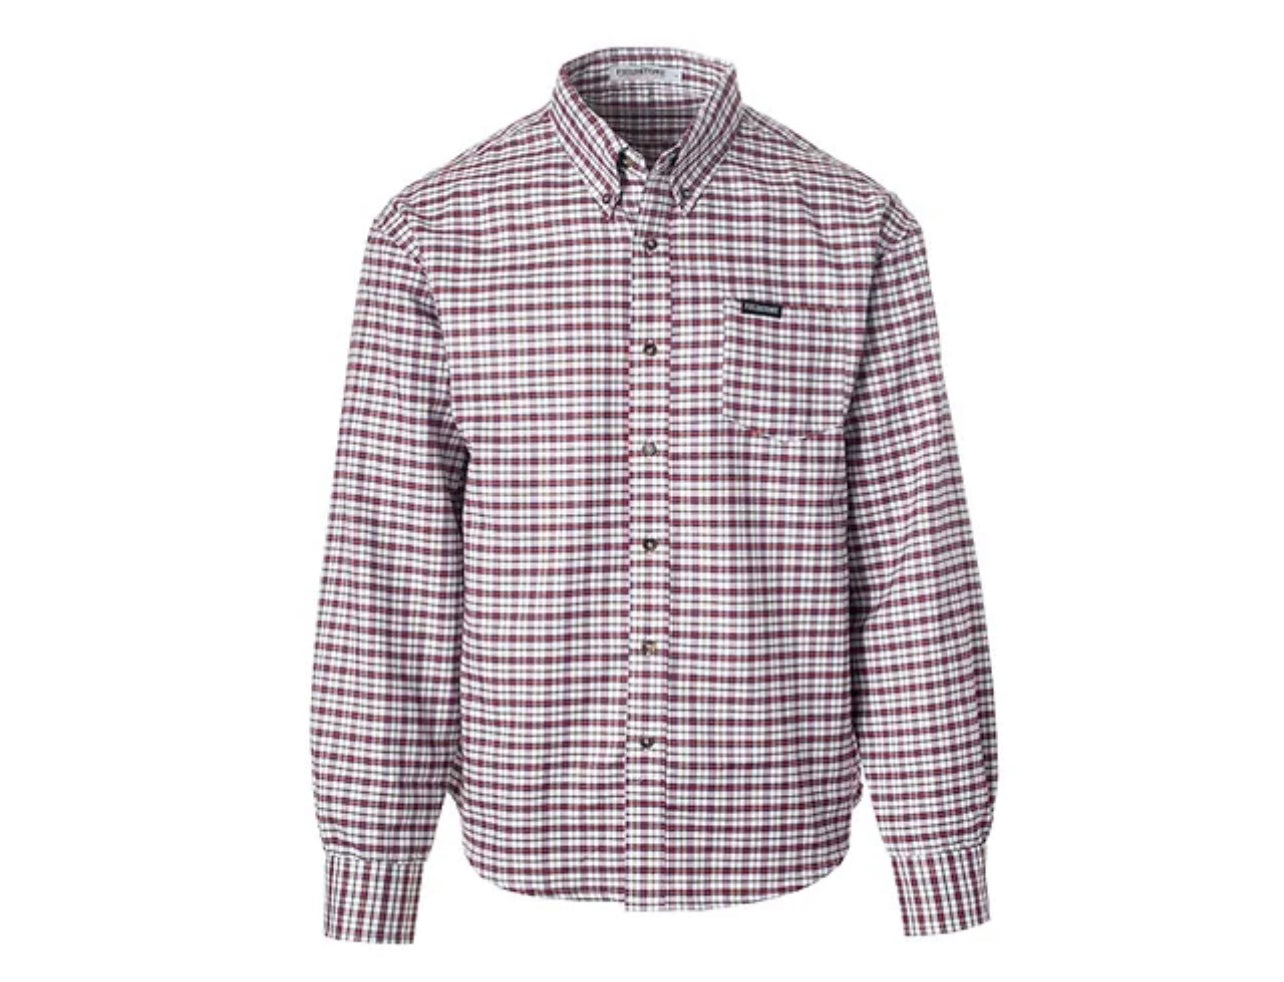 Toddler/Youth Hatfield button down